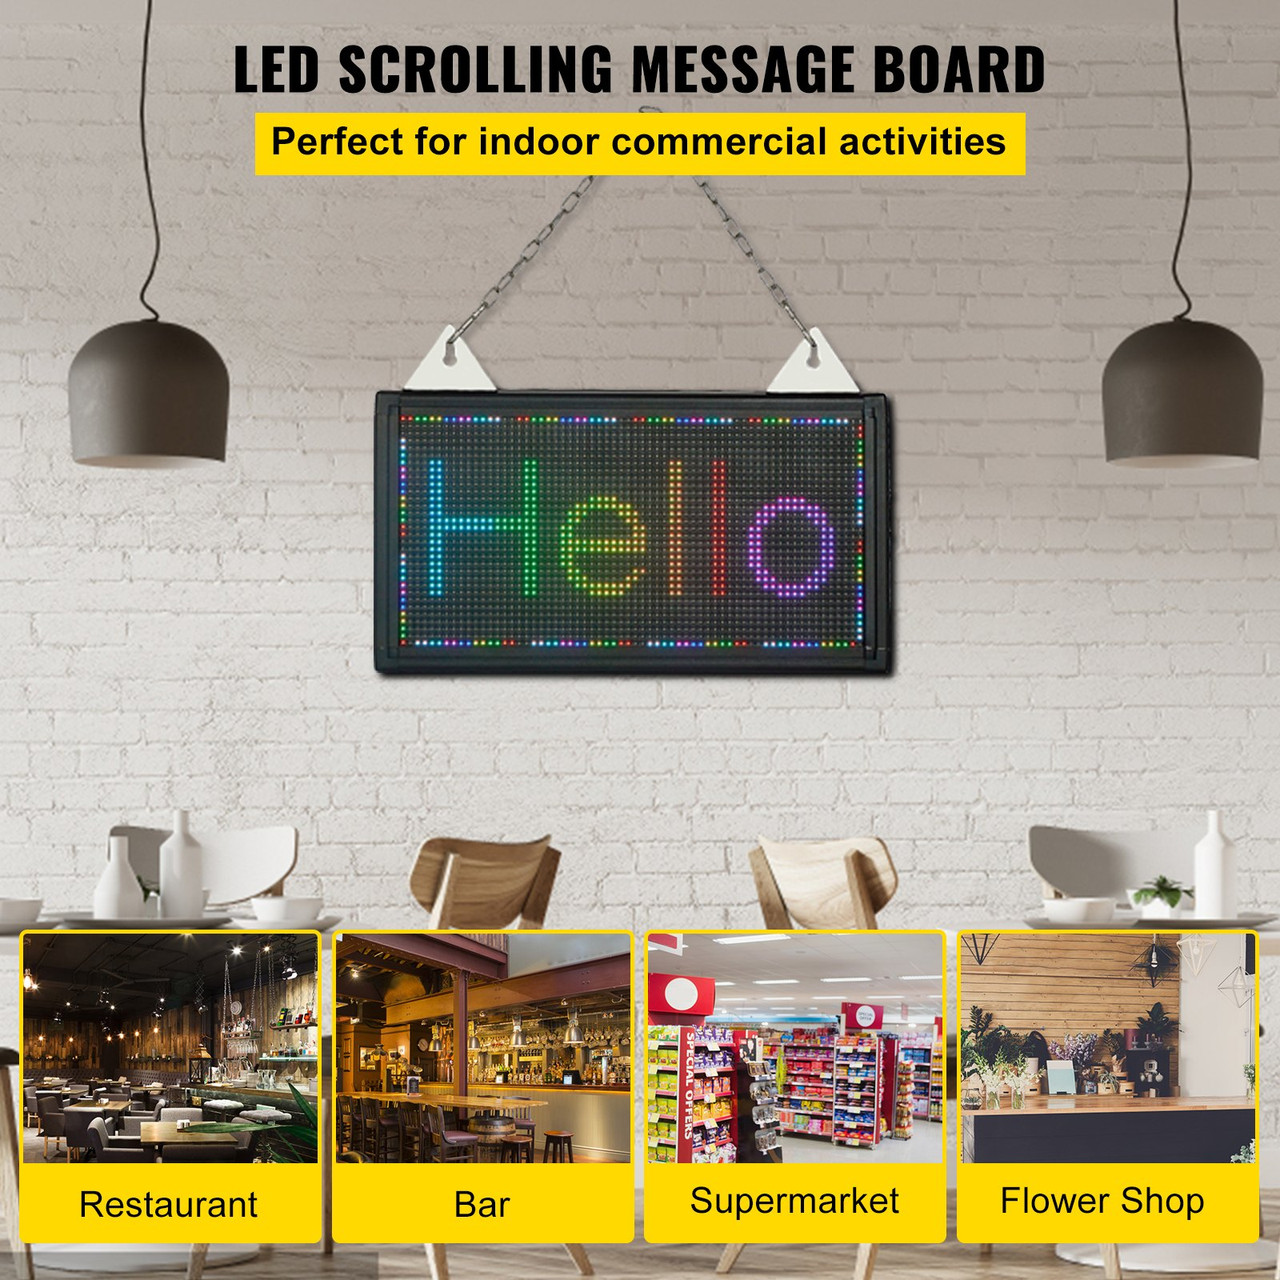 LED Scrolling Sign, 14" x 8" WiFi & USB Control, Full Color P5 Programmable Display, Indoor High Resolution Message Board, High Brightness Electronic